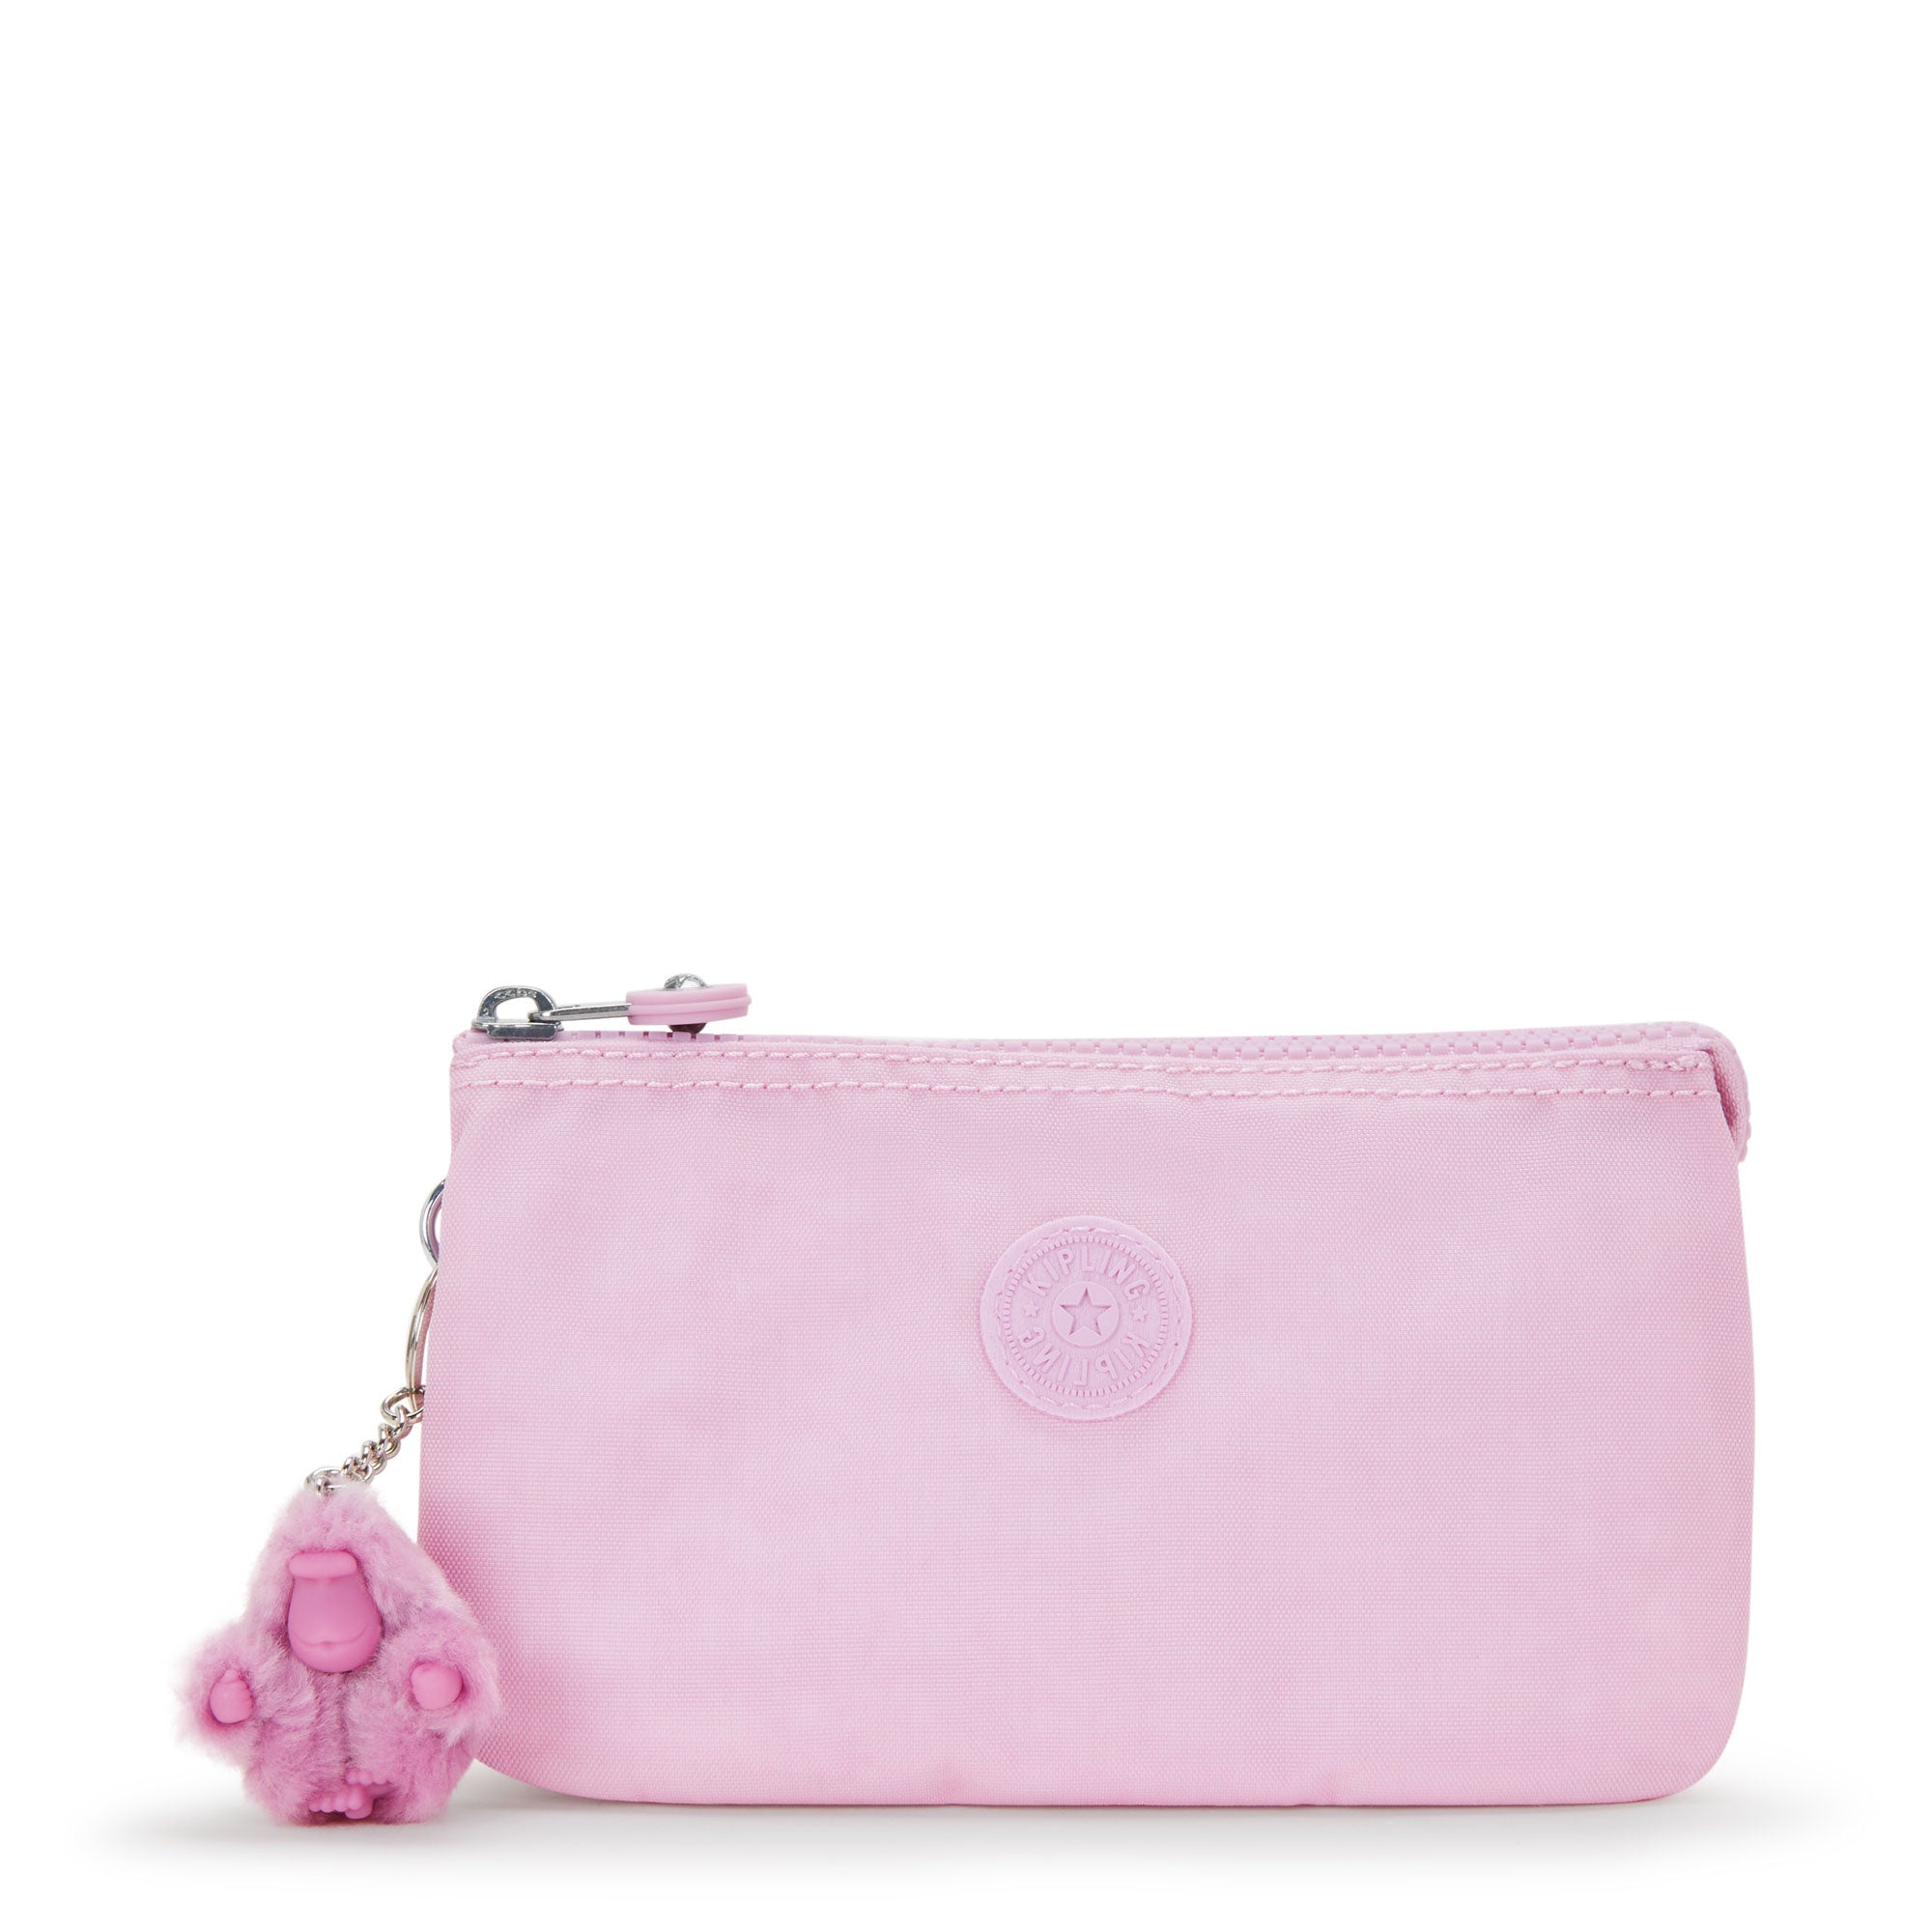 Kipling purse deal: Save 25% on handbags and totes right now